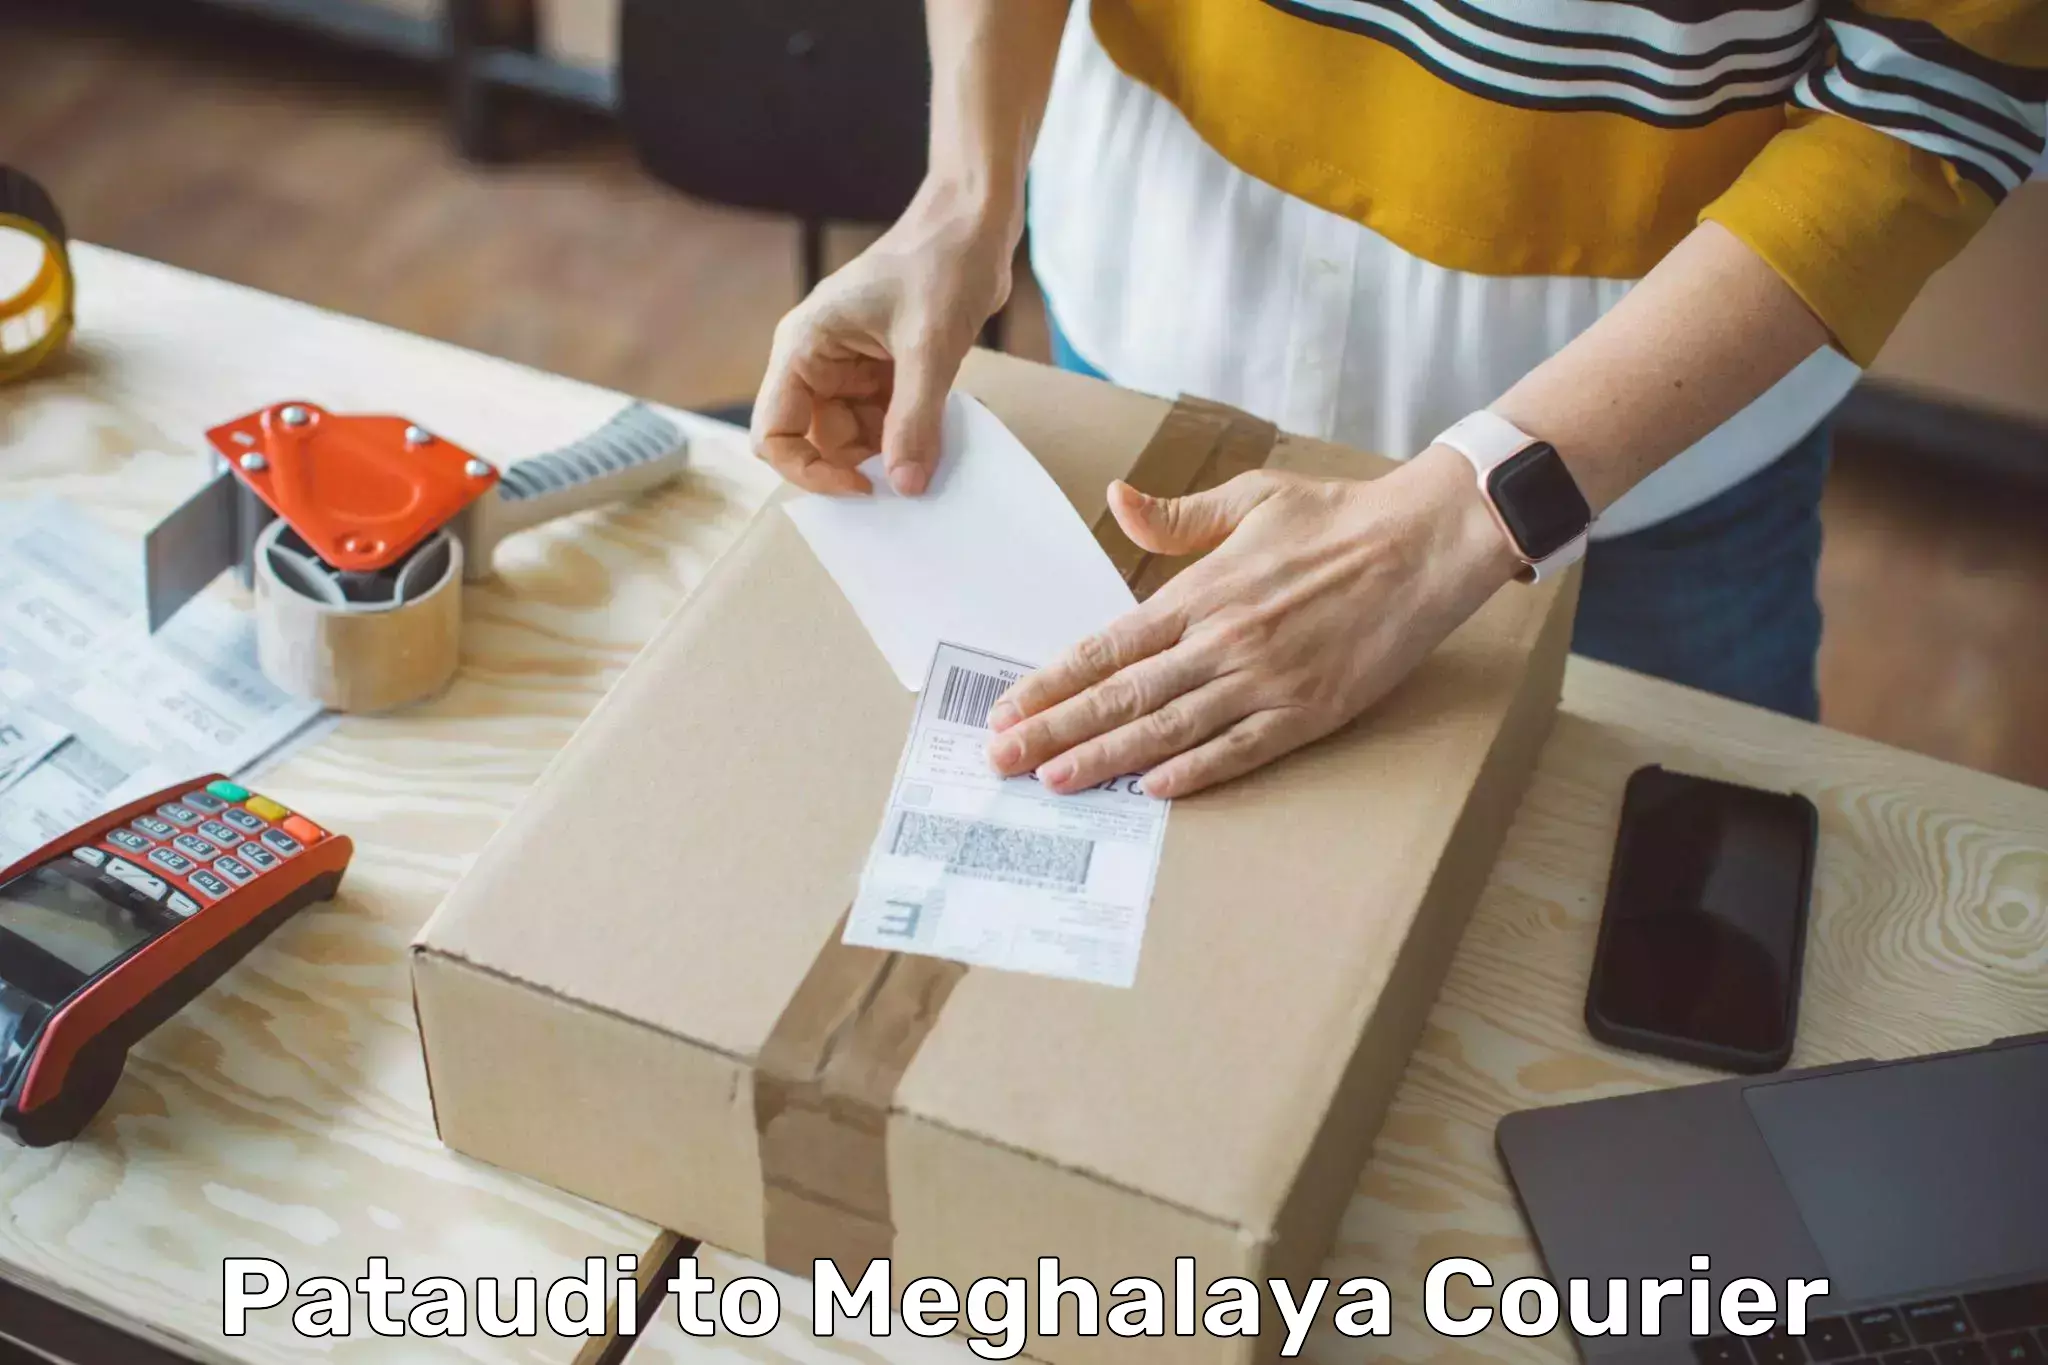 Speedy delivery service in Pataudi to Meghalaya